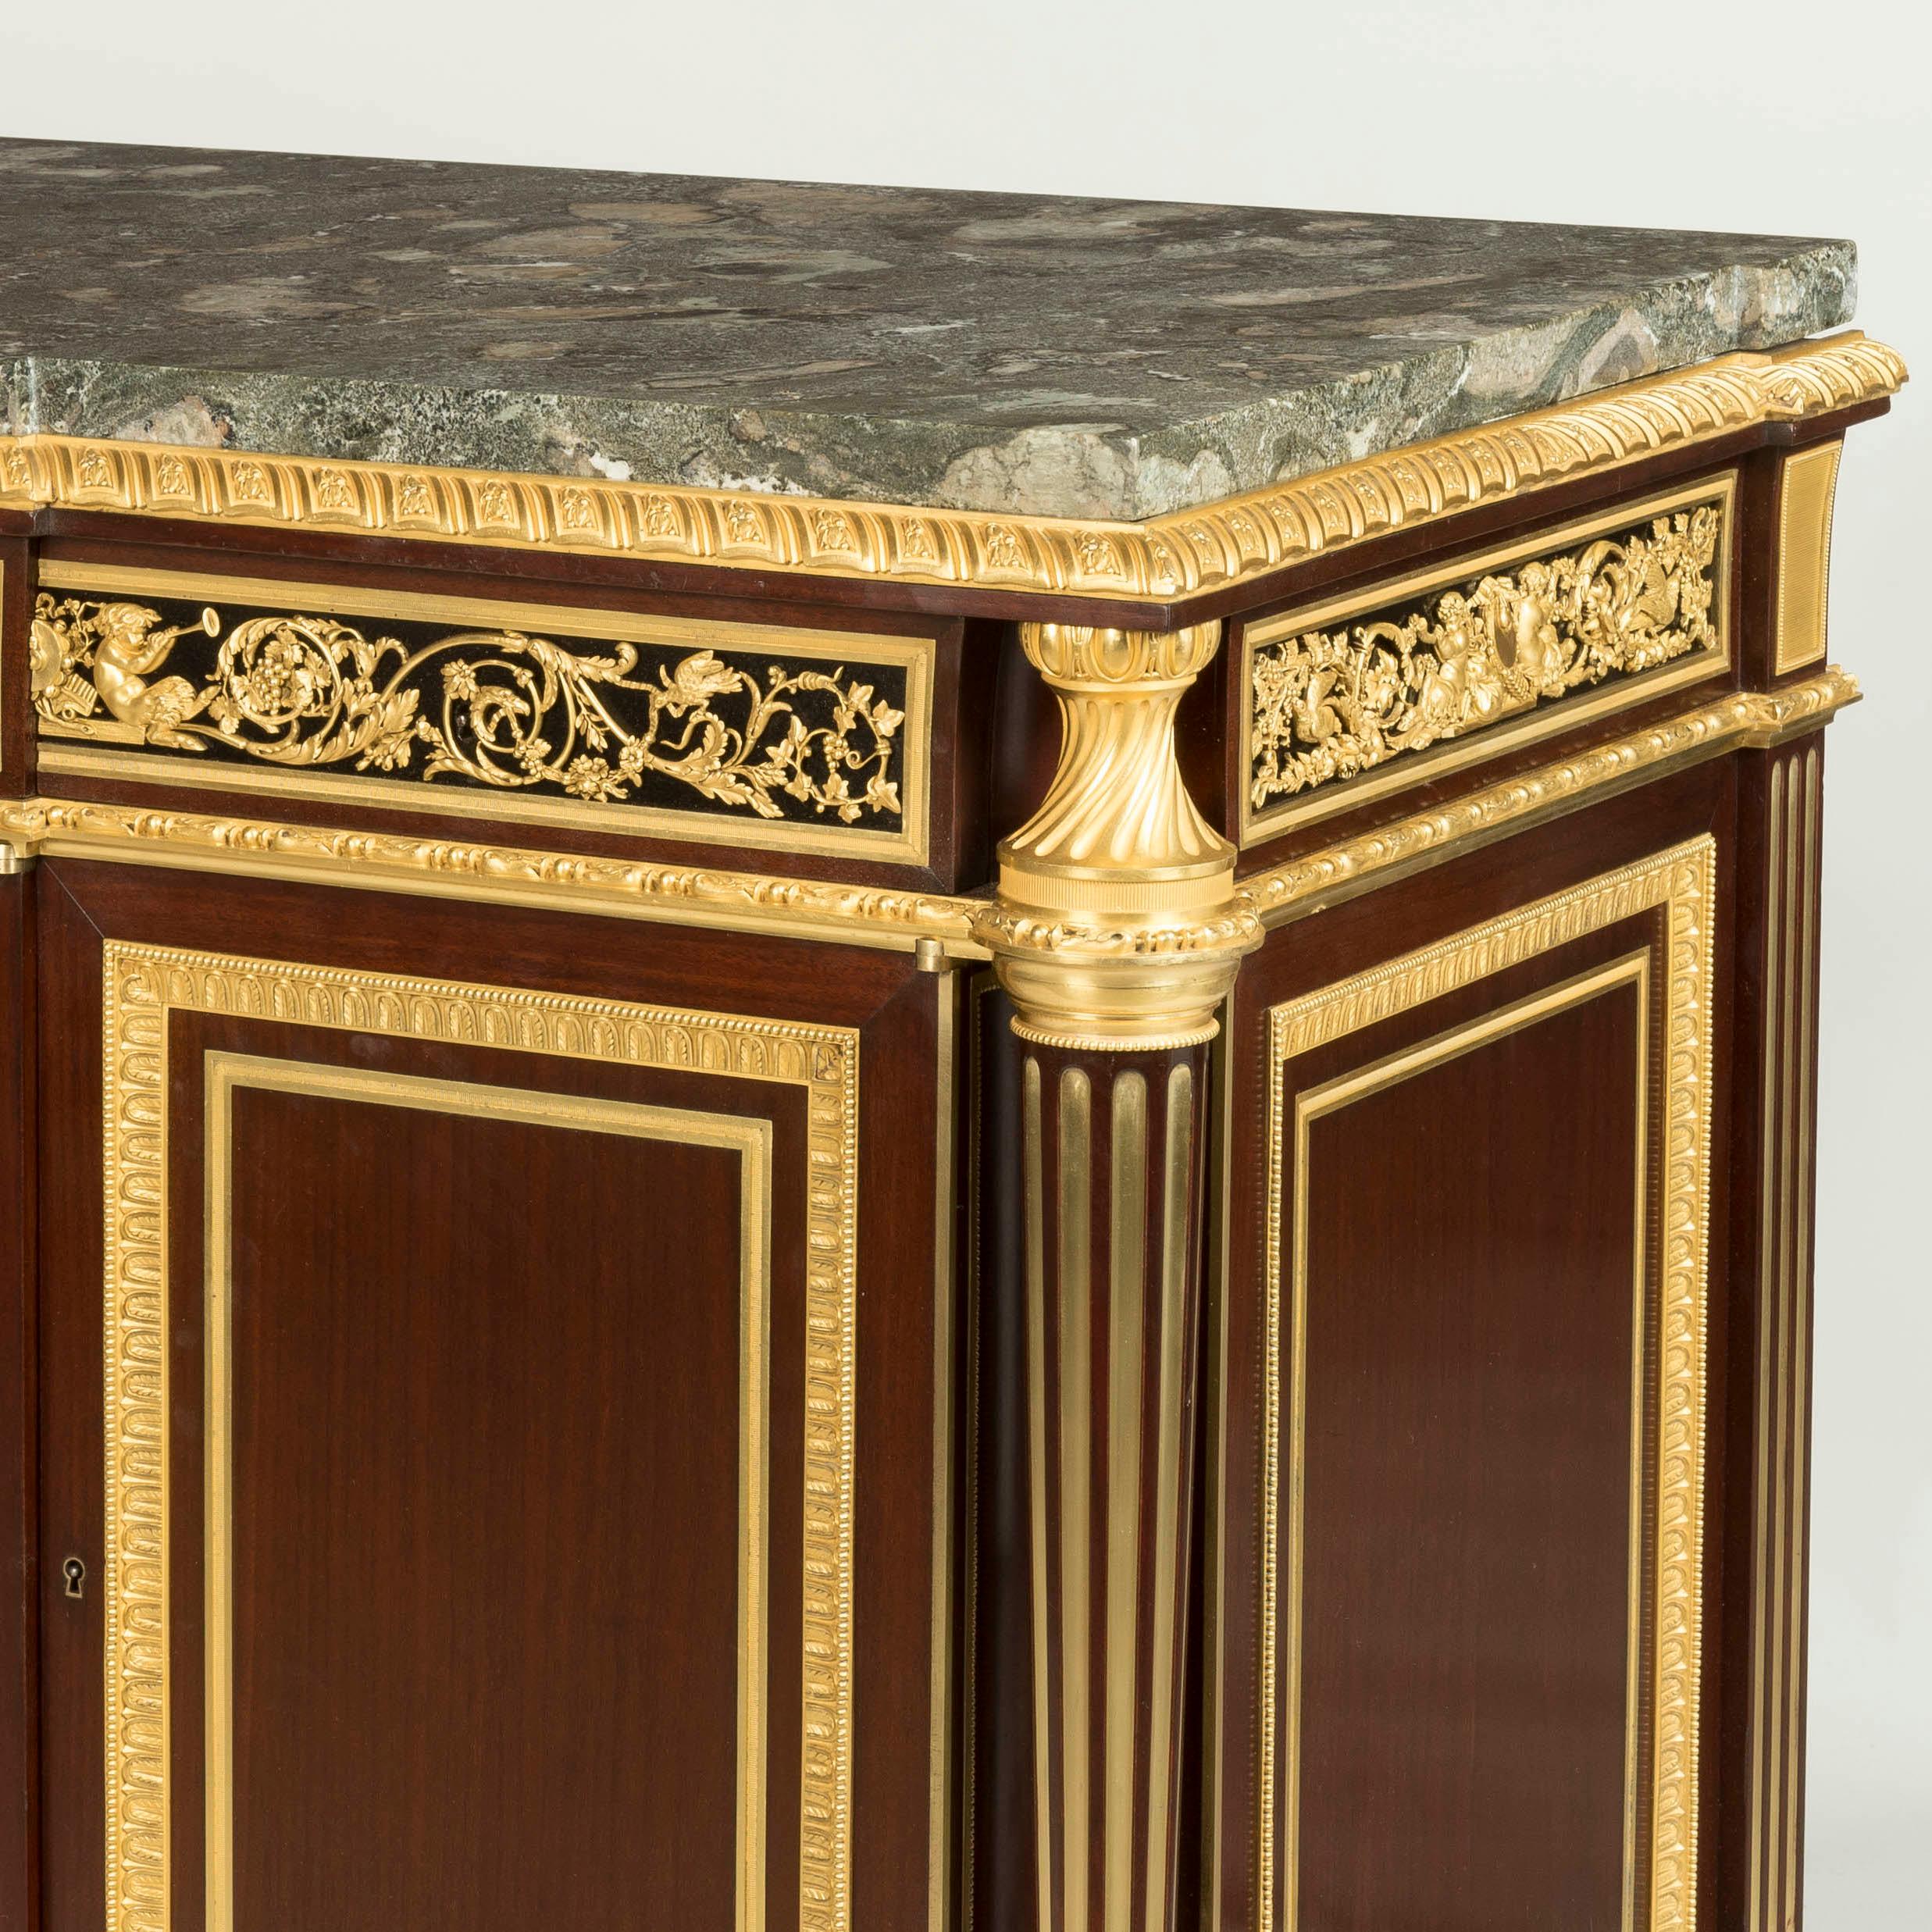 19th Century French Marble Top Commode in the Louis XVI Style by Henry Dasson For Sale 1